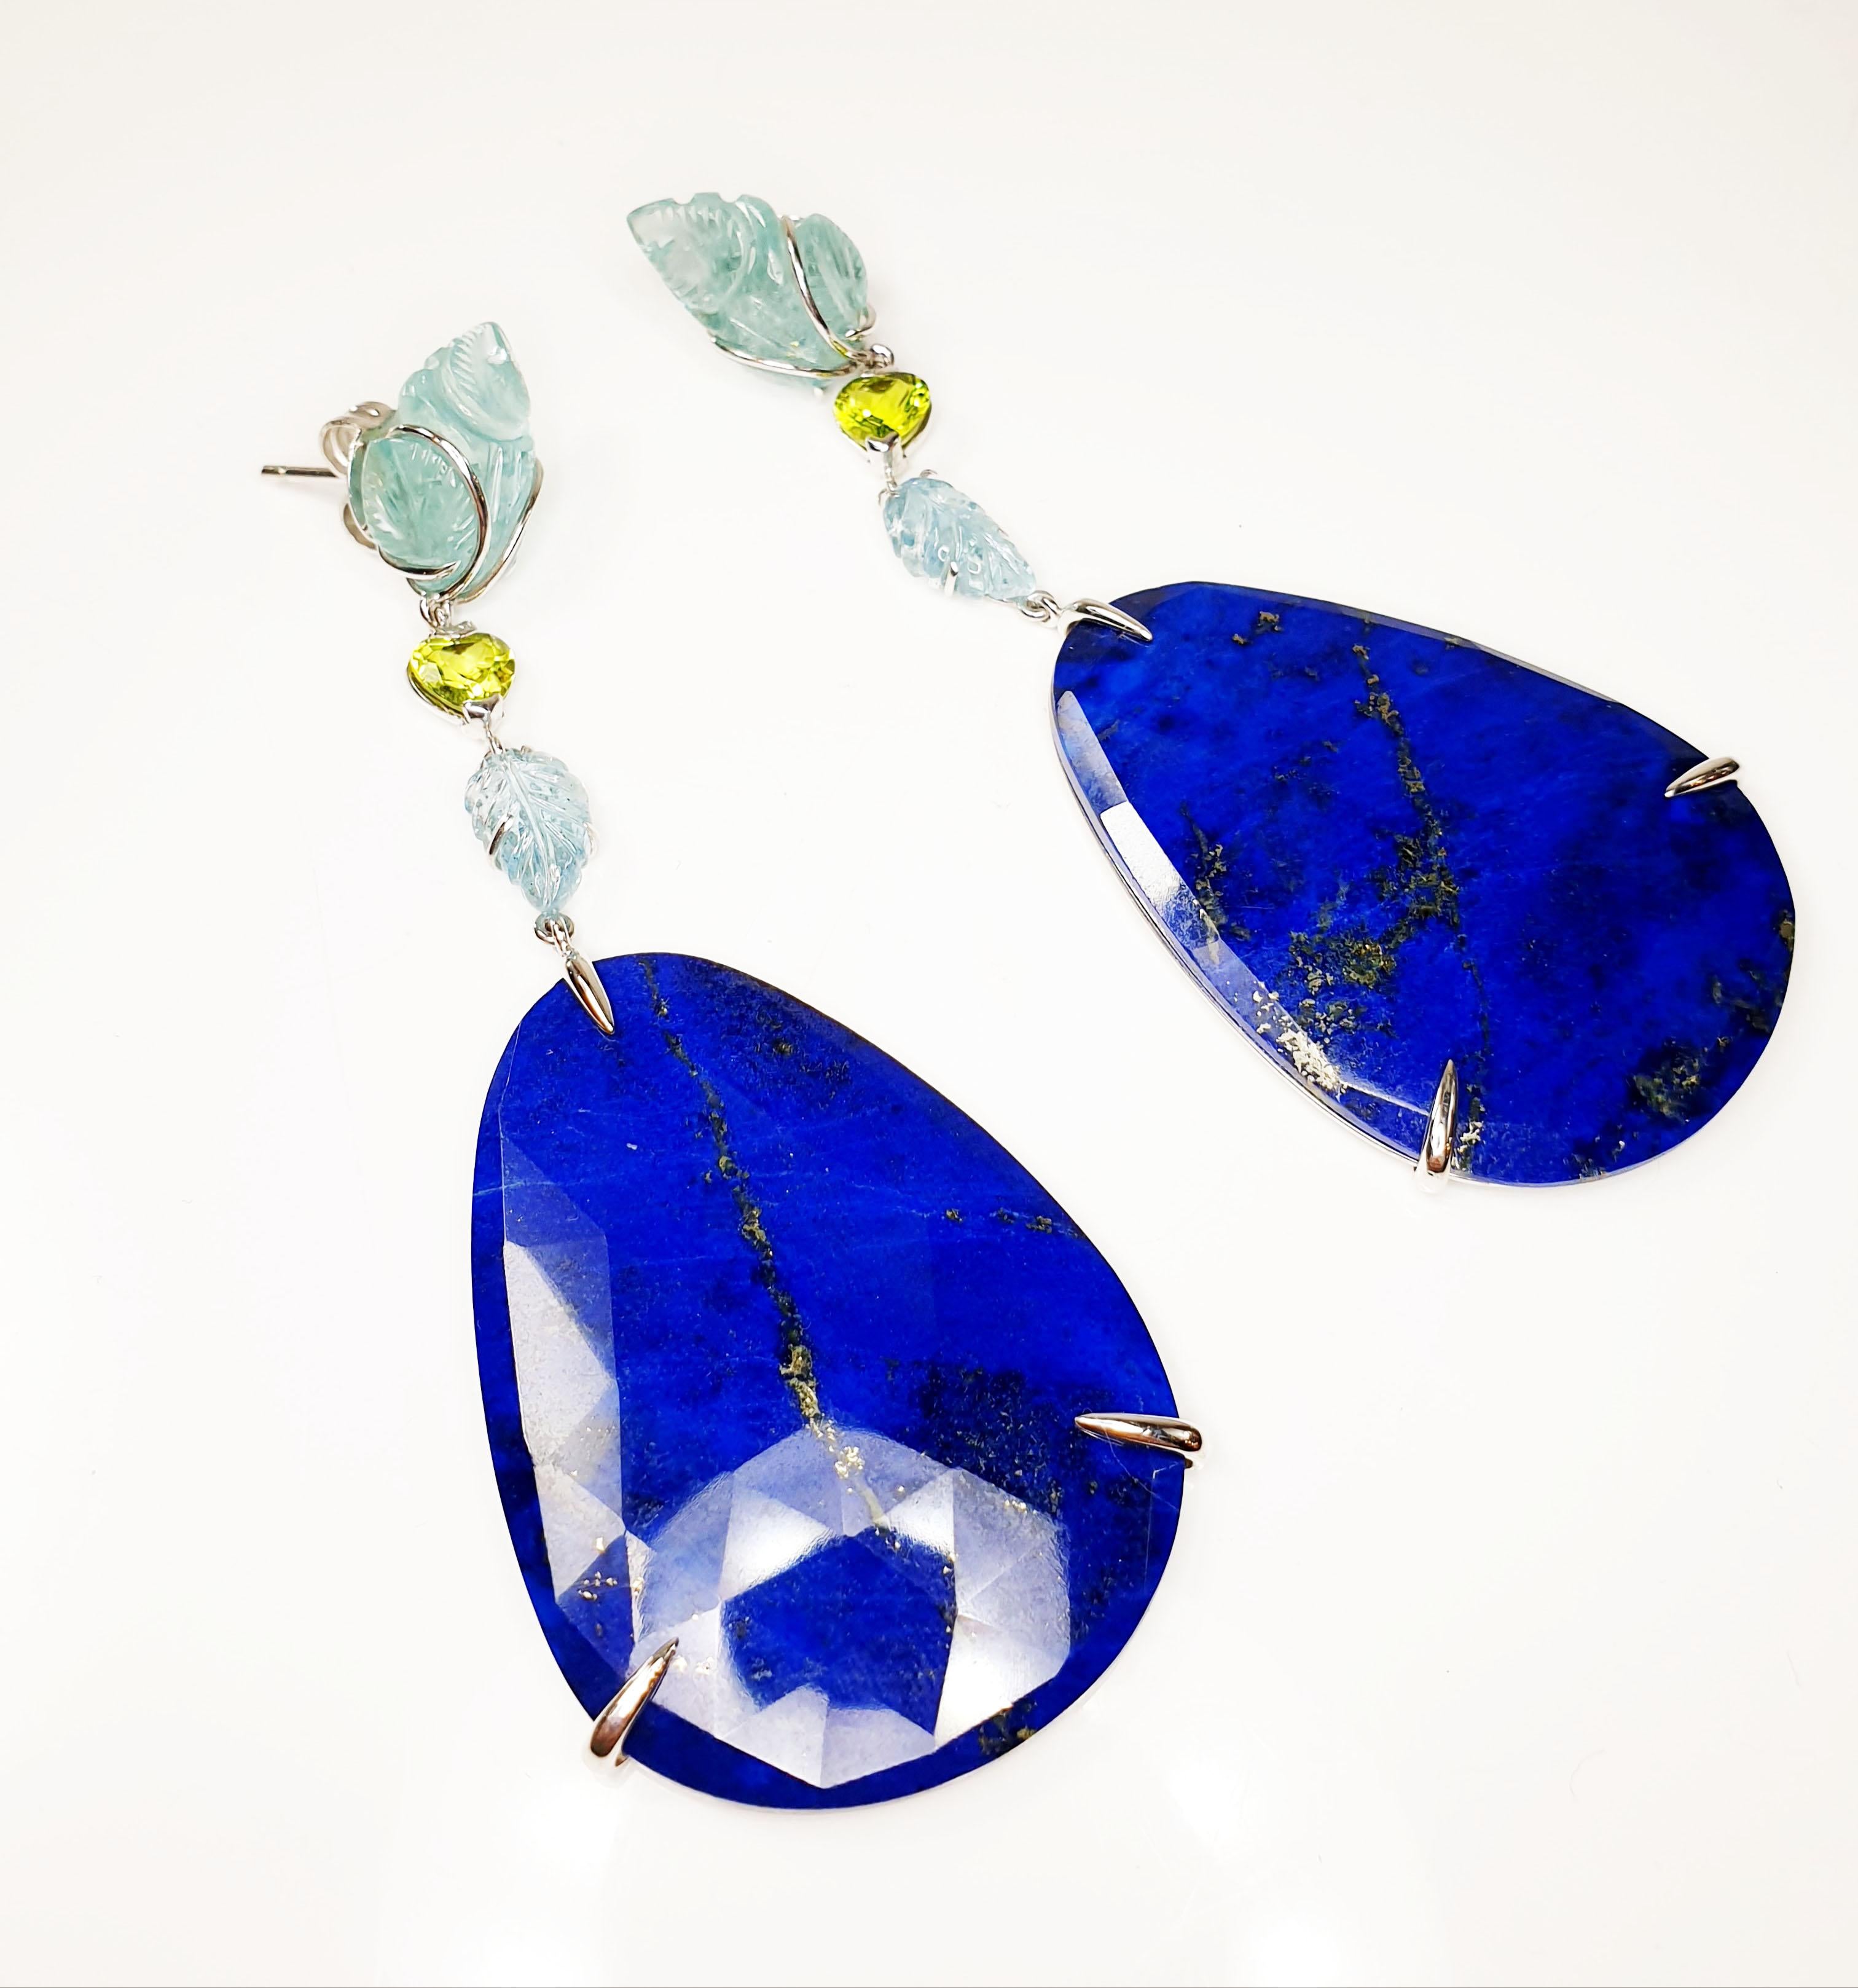 Women's Carved Leafs Aquamarines Peridot in 18k Gold Earrings with Lapis Lazuli Drops For Sale